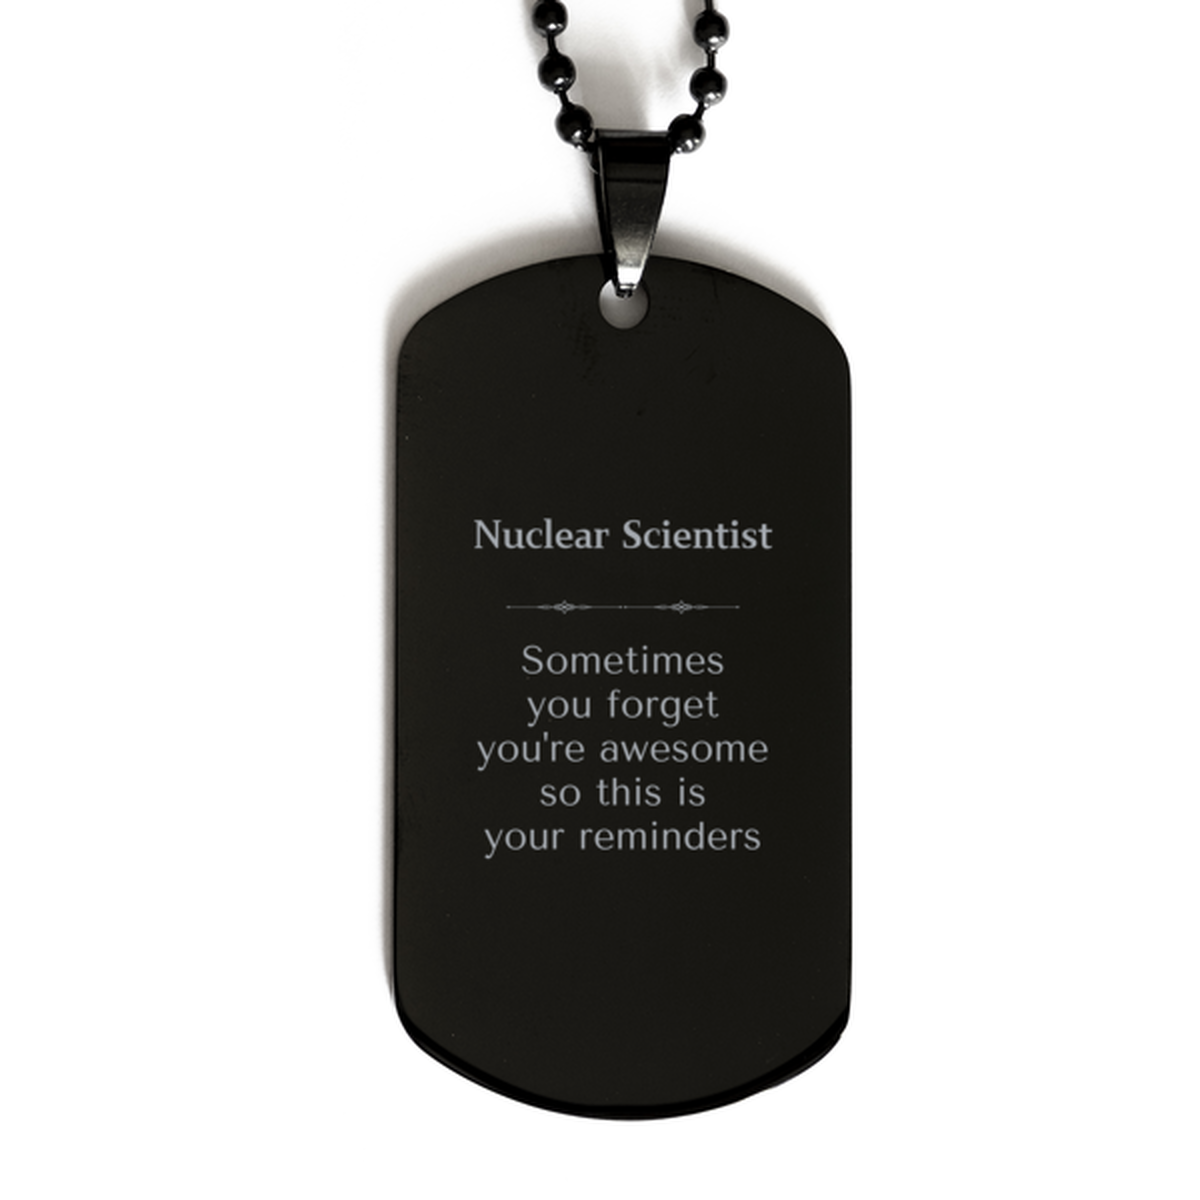 Sentimental Nuclear Scientist Black Dog Tag, Nuclear Scientist Sometimes you forget you're awesome so this is your reminders, Graduation Christmas Birthday Gifts for Nuclear Scientist, Men, Women, Coworkers